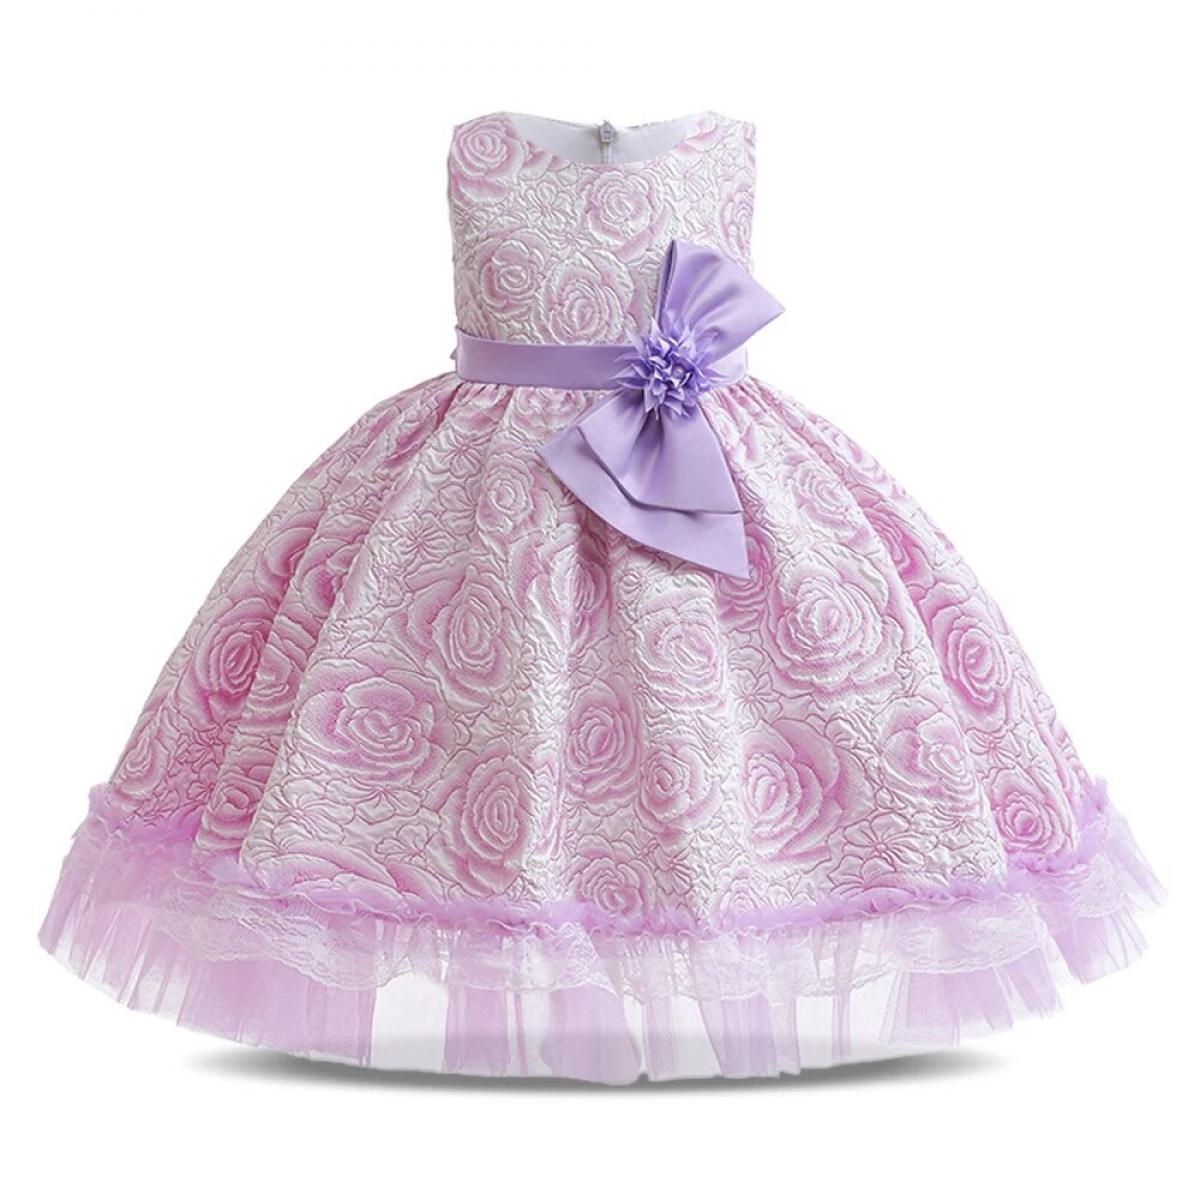 Flowers Princess Girl Dress Wedding Birthday Party For Children Costume Bow Prom Ball Gown Elegant  Evening Bridesmaid V